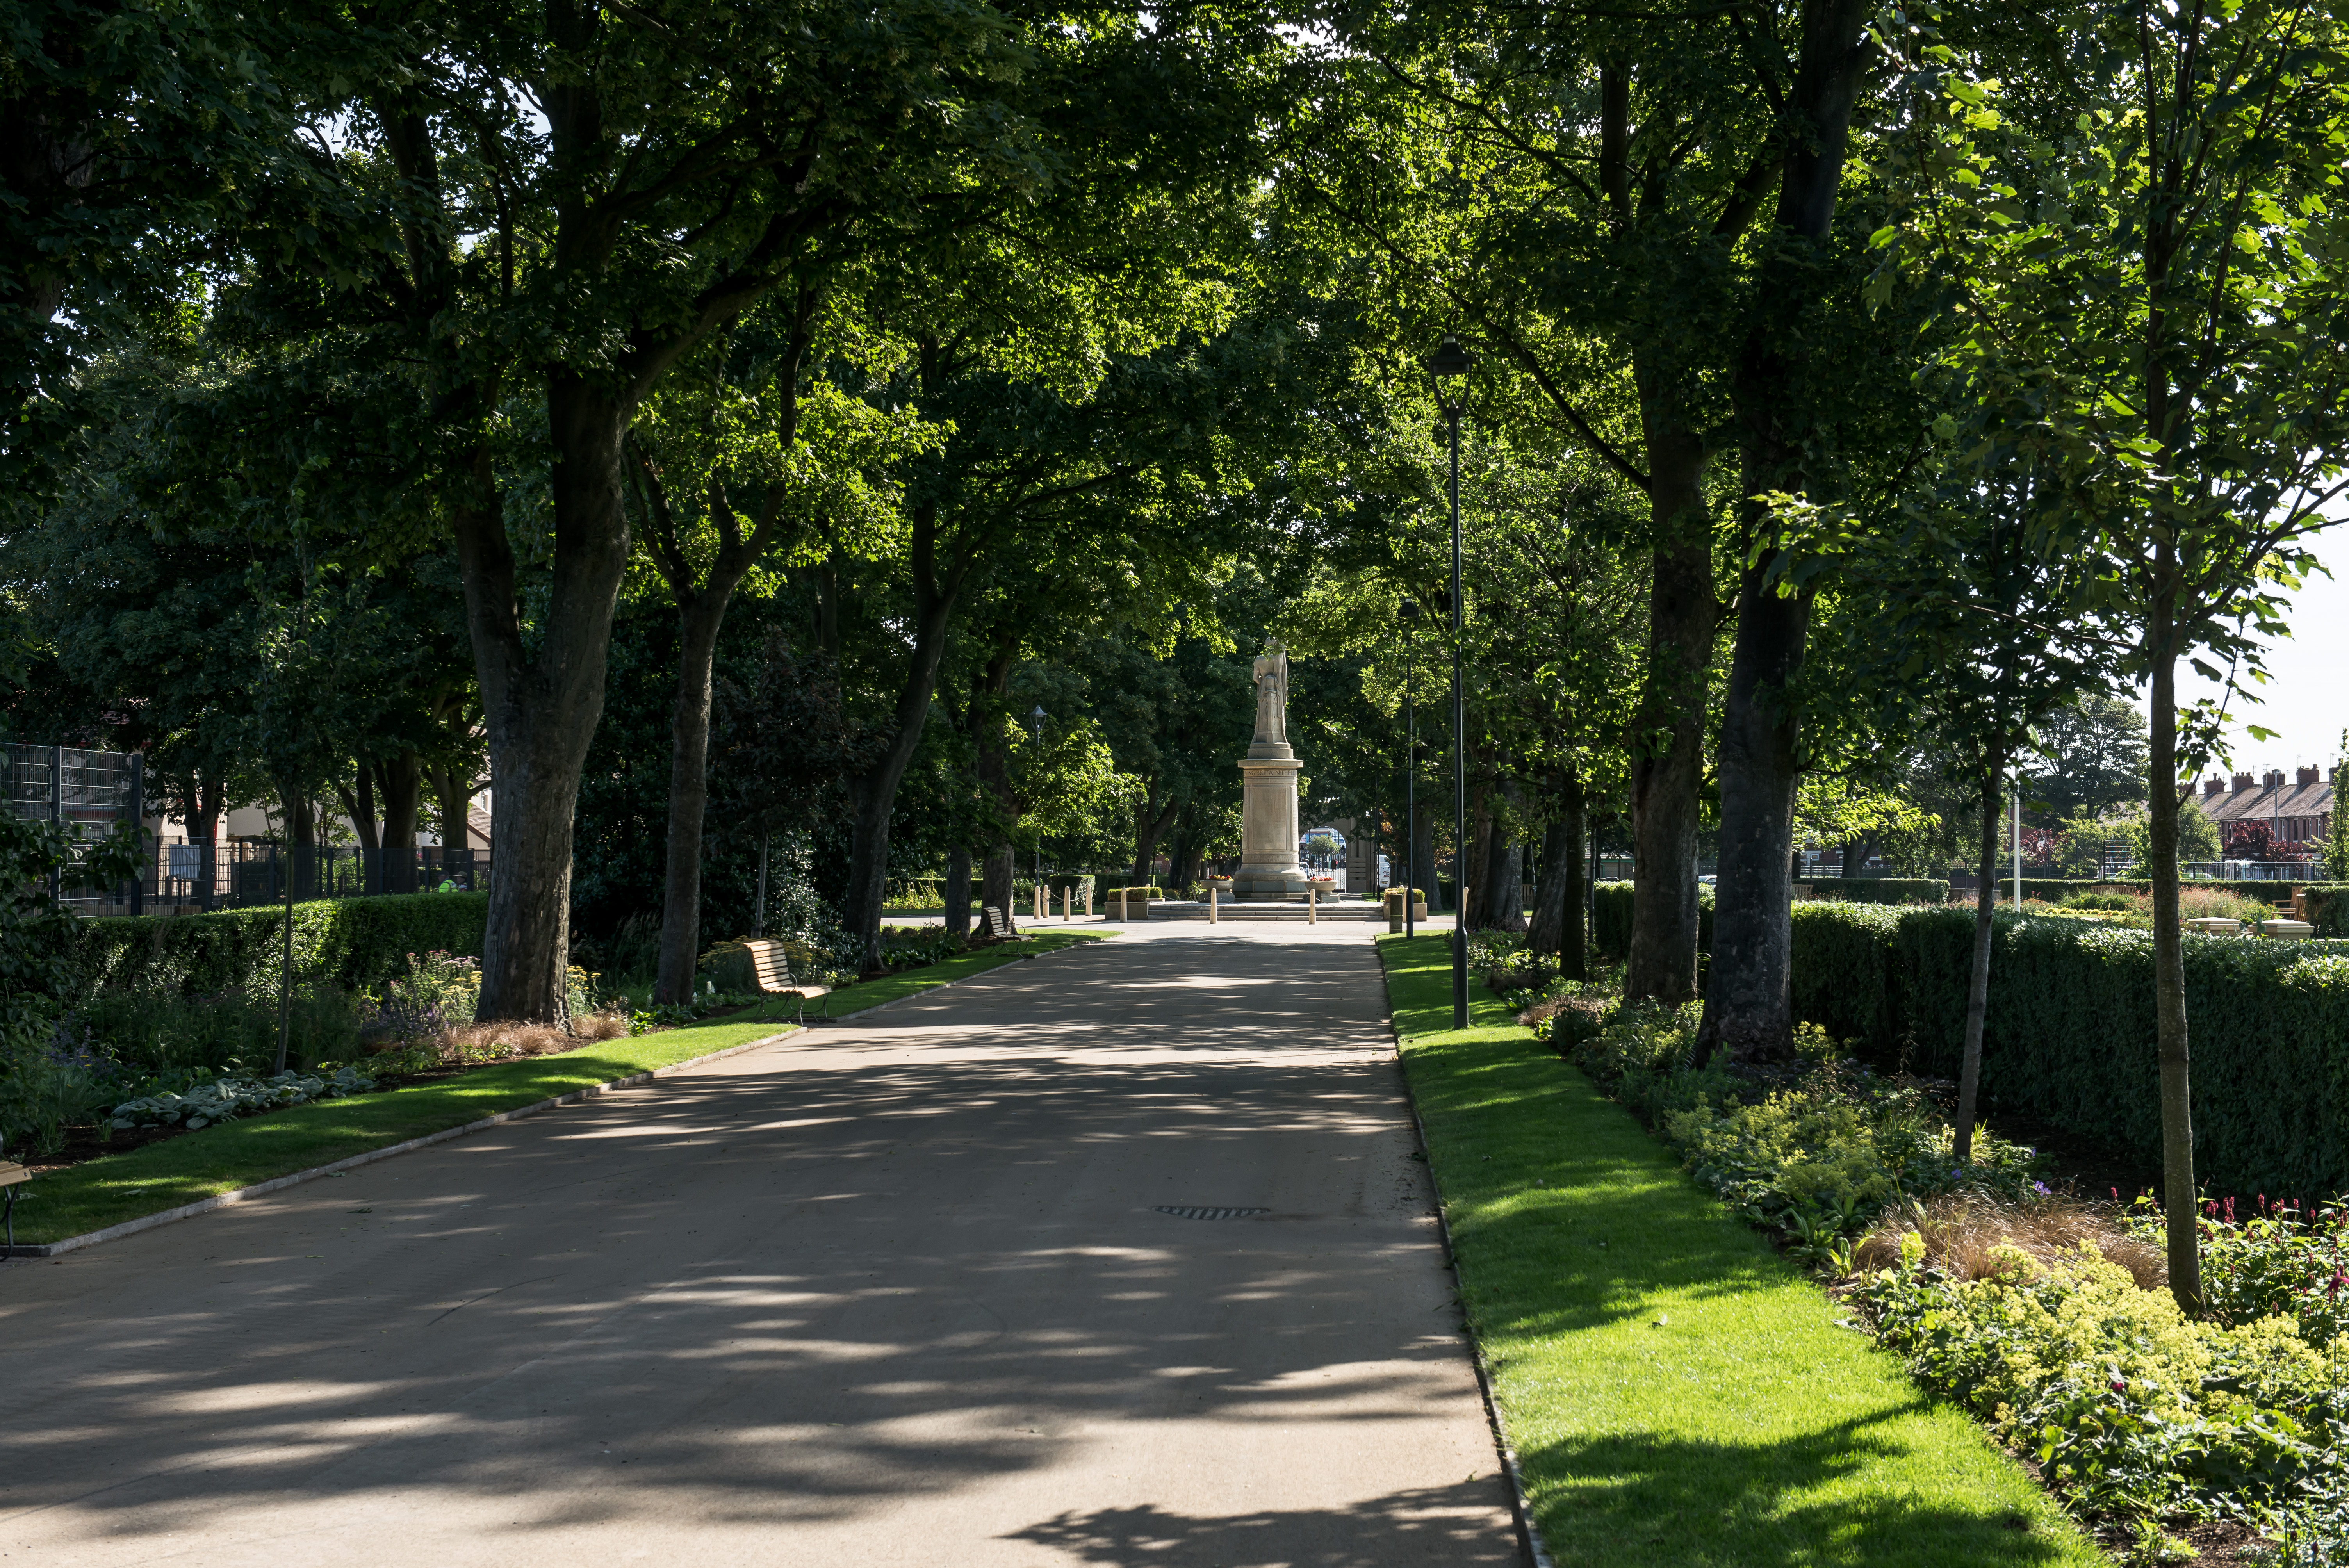 Tree lined path with statue at the end on a sunny day in Memorial Park.